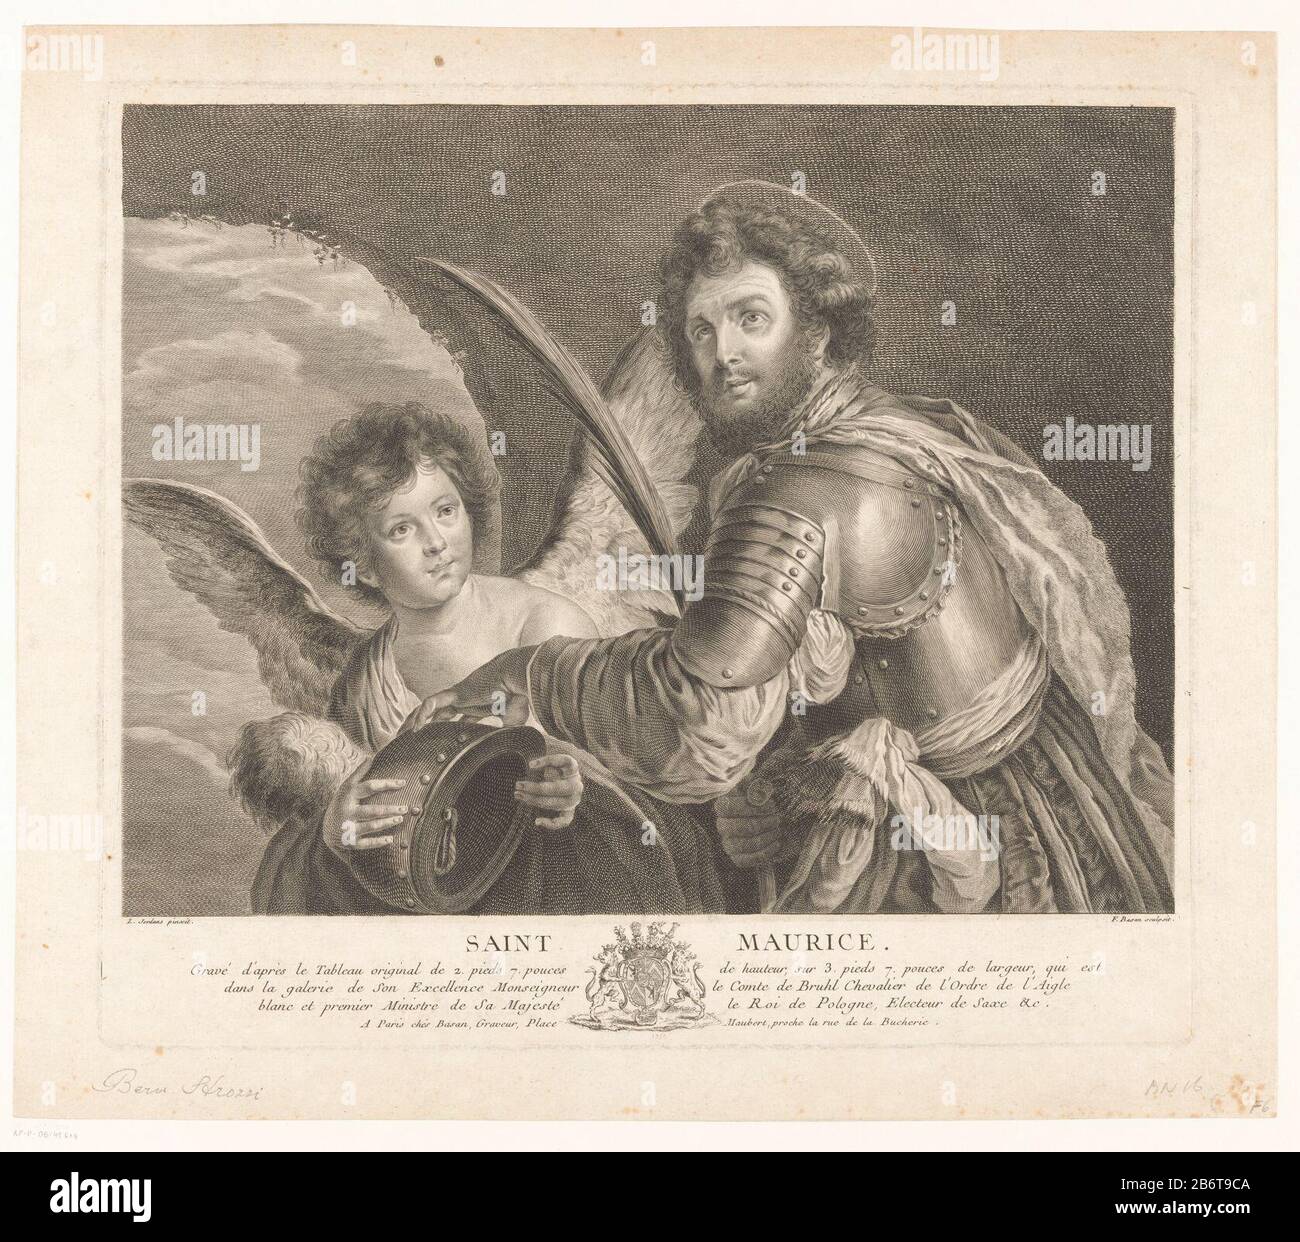 Heilige Mauritius Saint Maurice (titel op object) Saint Mauritius Saint Maurice (title object) Object type: picture Item number: RP-P-OB-41.614Catalogusreferentie: IFF 18e siècle 16LeBlanc 15 Inscriptions / Brands: collector's mark, verso, stamped: Lugt 240 Manufacturer : printmaker: Pierre François basan (listed property) to painting by Luca Giordano (listed building) publisher: Pierre François basan (listed property) Place manufacture: printmaker: France Publisher: Paris Date: 1733 - 1797 Material: paper Technique: engra (printing process) / etch dimensions: plate edge: h 343 mm × W 395 mm S Stock Photo